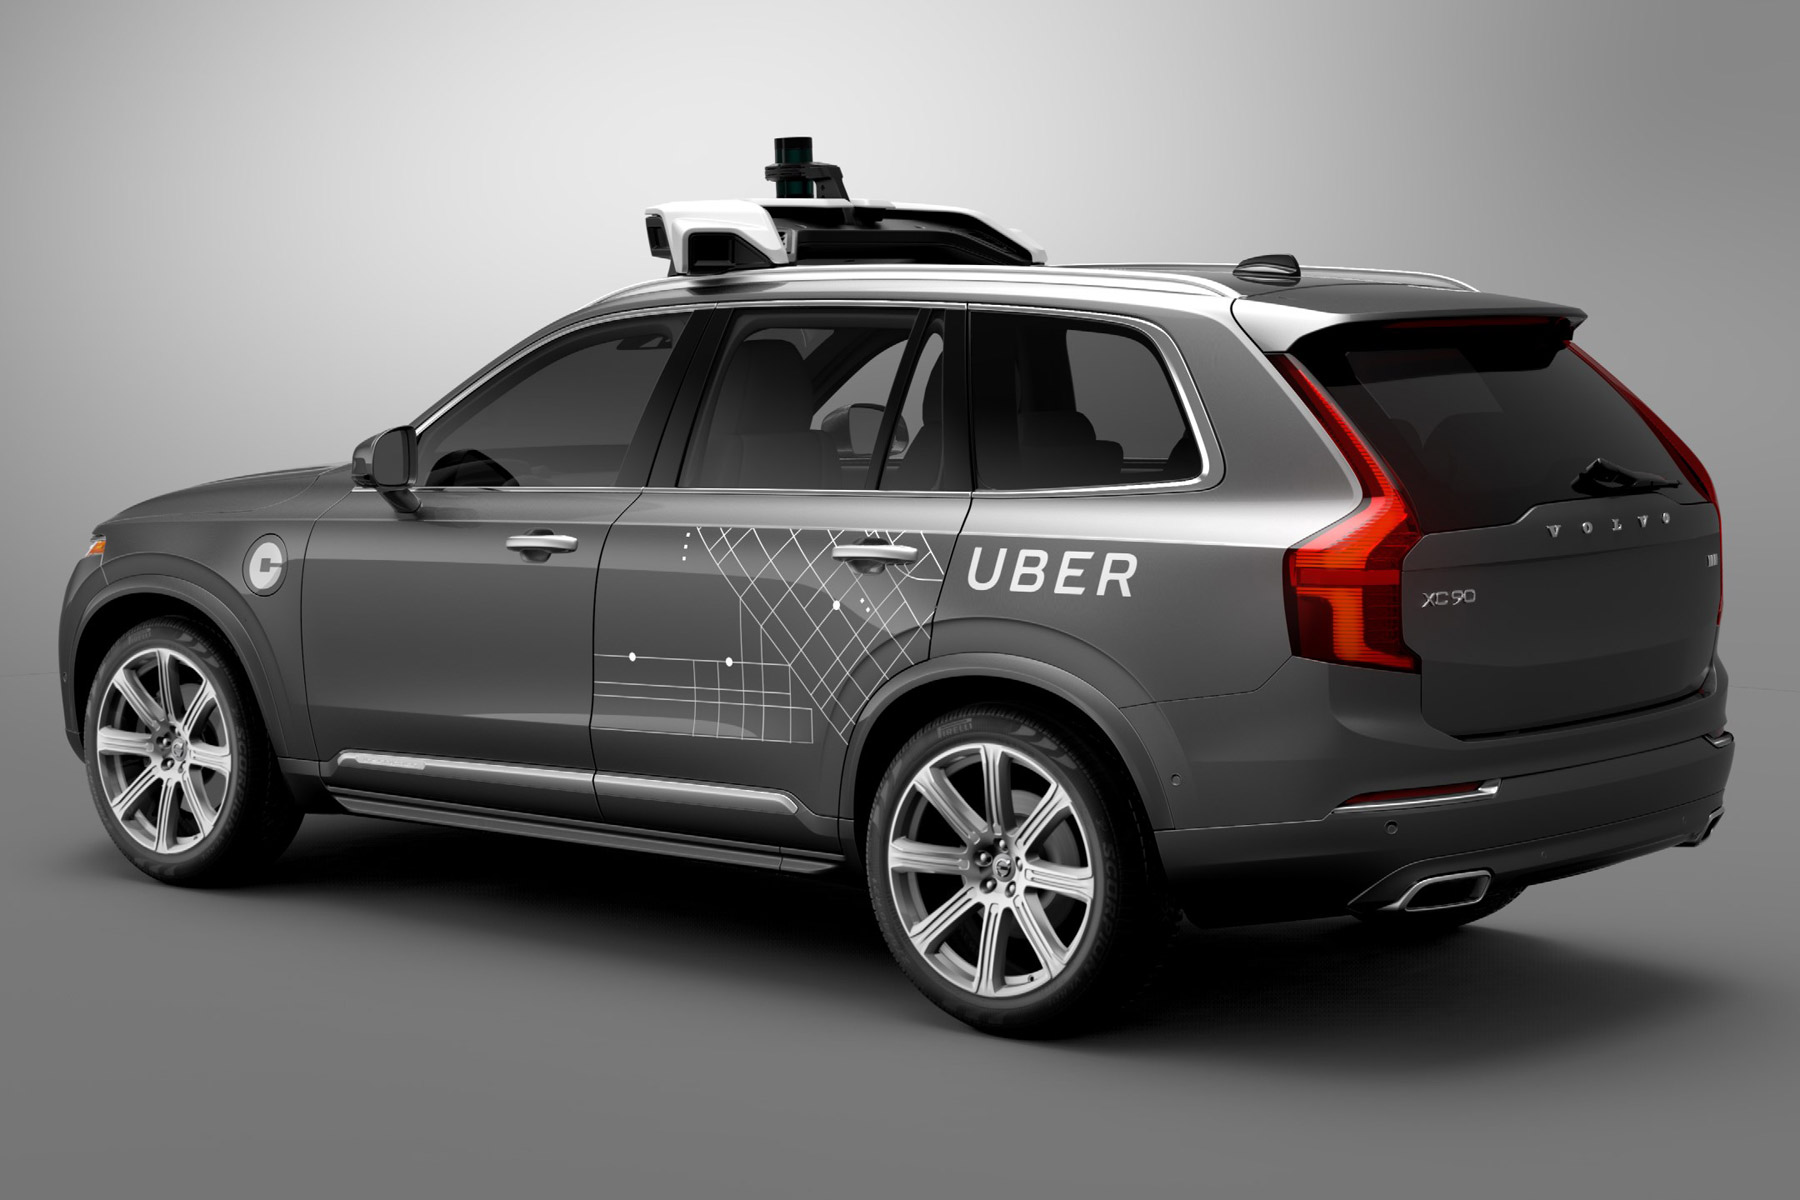 Uber is mapping UK roads ready for launching driverless cars